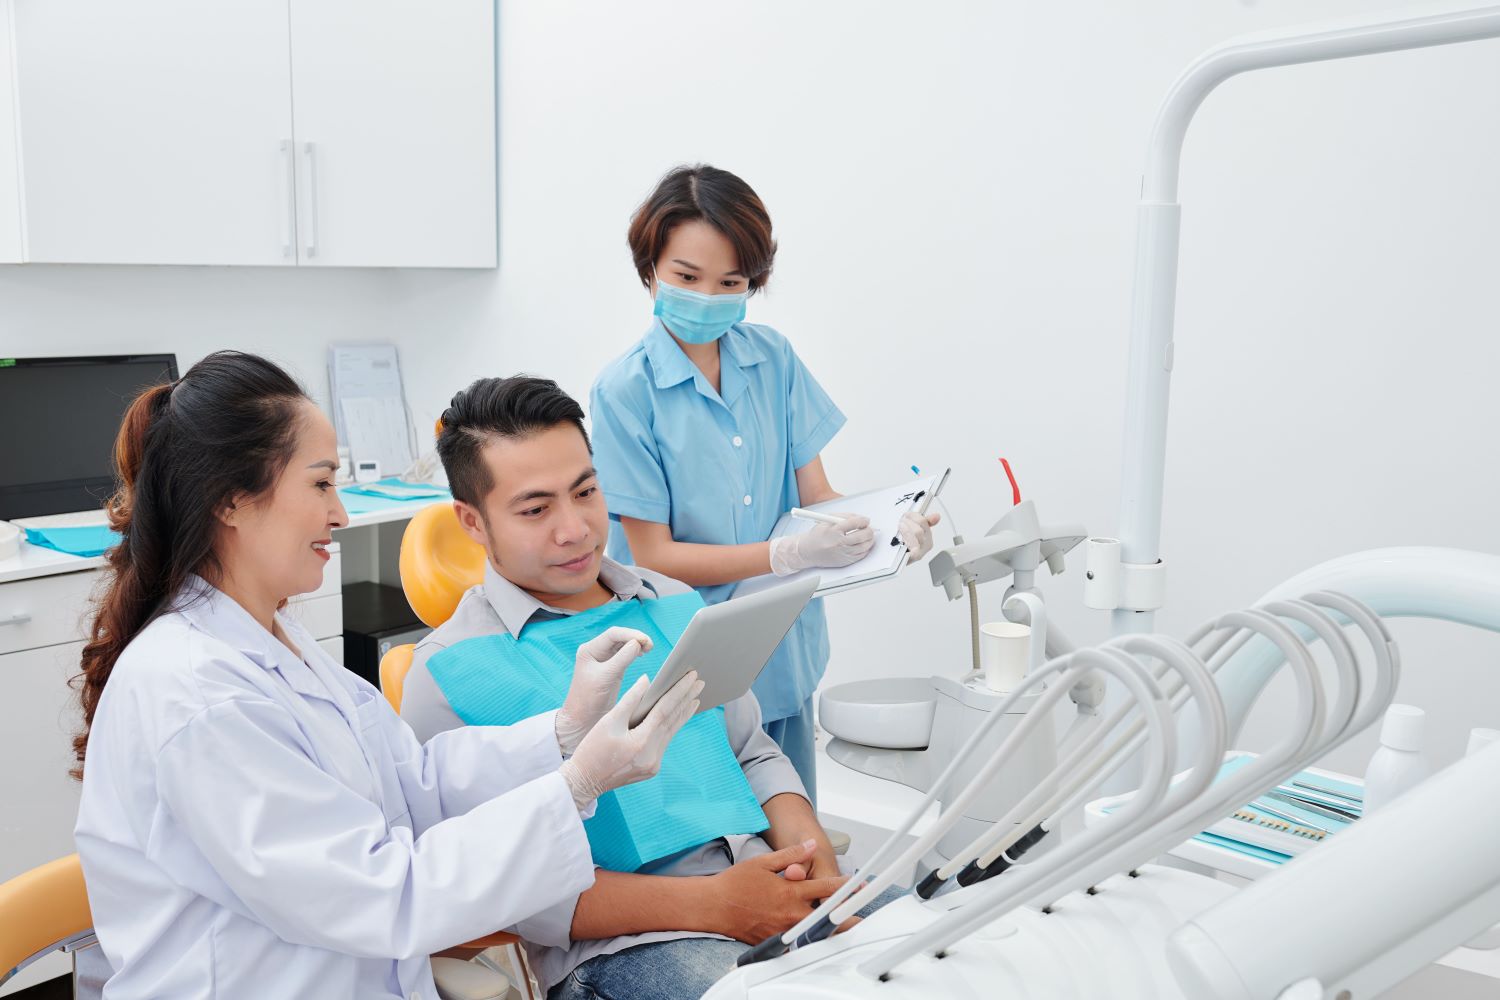 dentist-discussing-treatment-with-patient-2021-09-01-15-27-03-utc